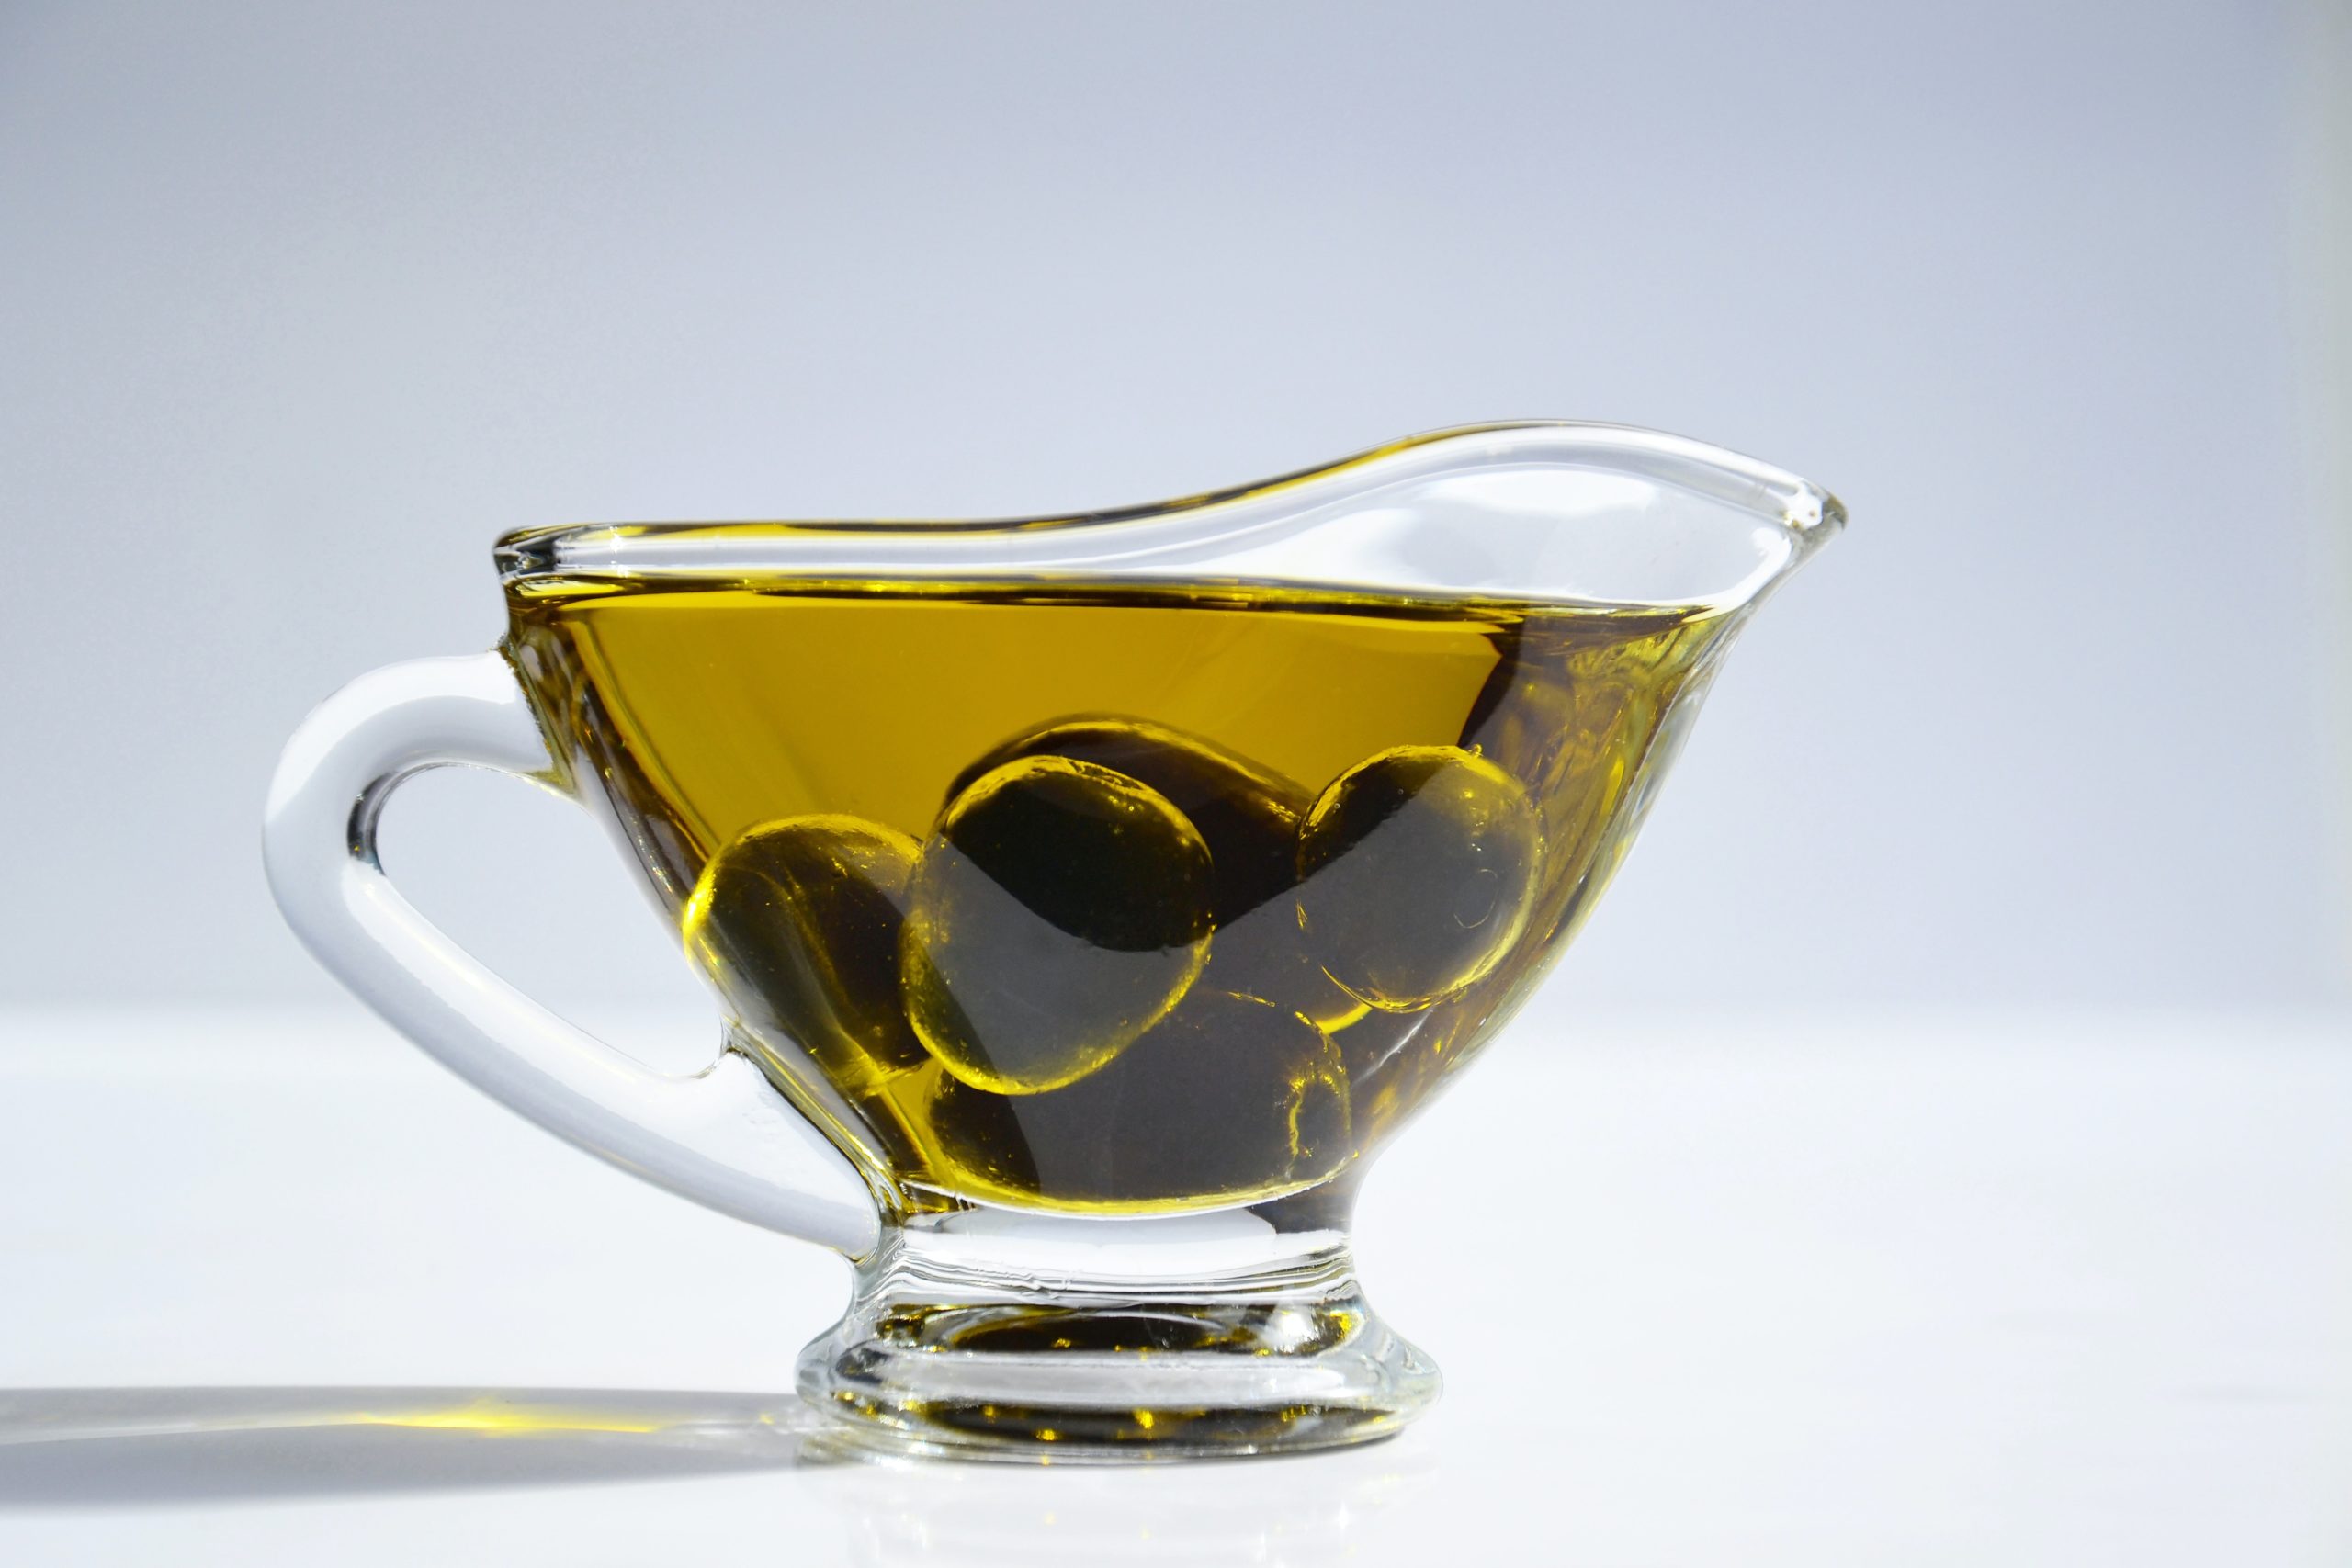 Olive oil has been associated with everything from improved cholesterol levels to rejuvenating hair growth. But just which are facts and which are fiction? We take some of the internet’s most popular claims about the benefits of olive oil and see what’s true, and what’s not.